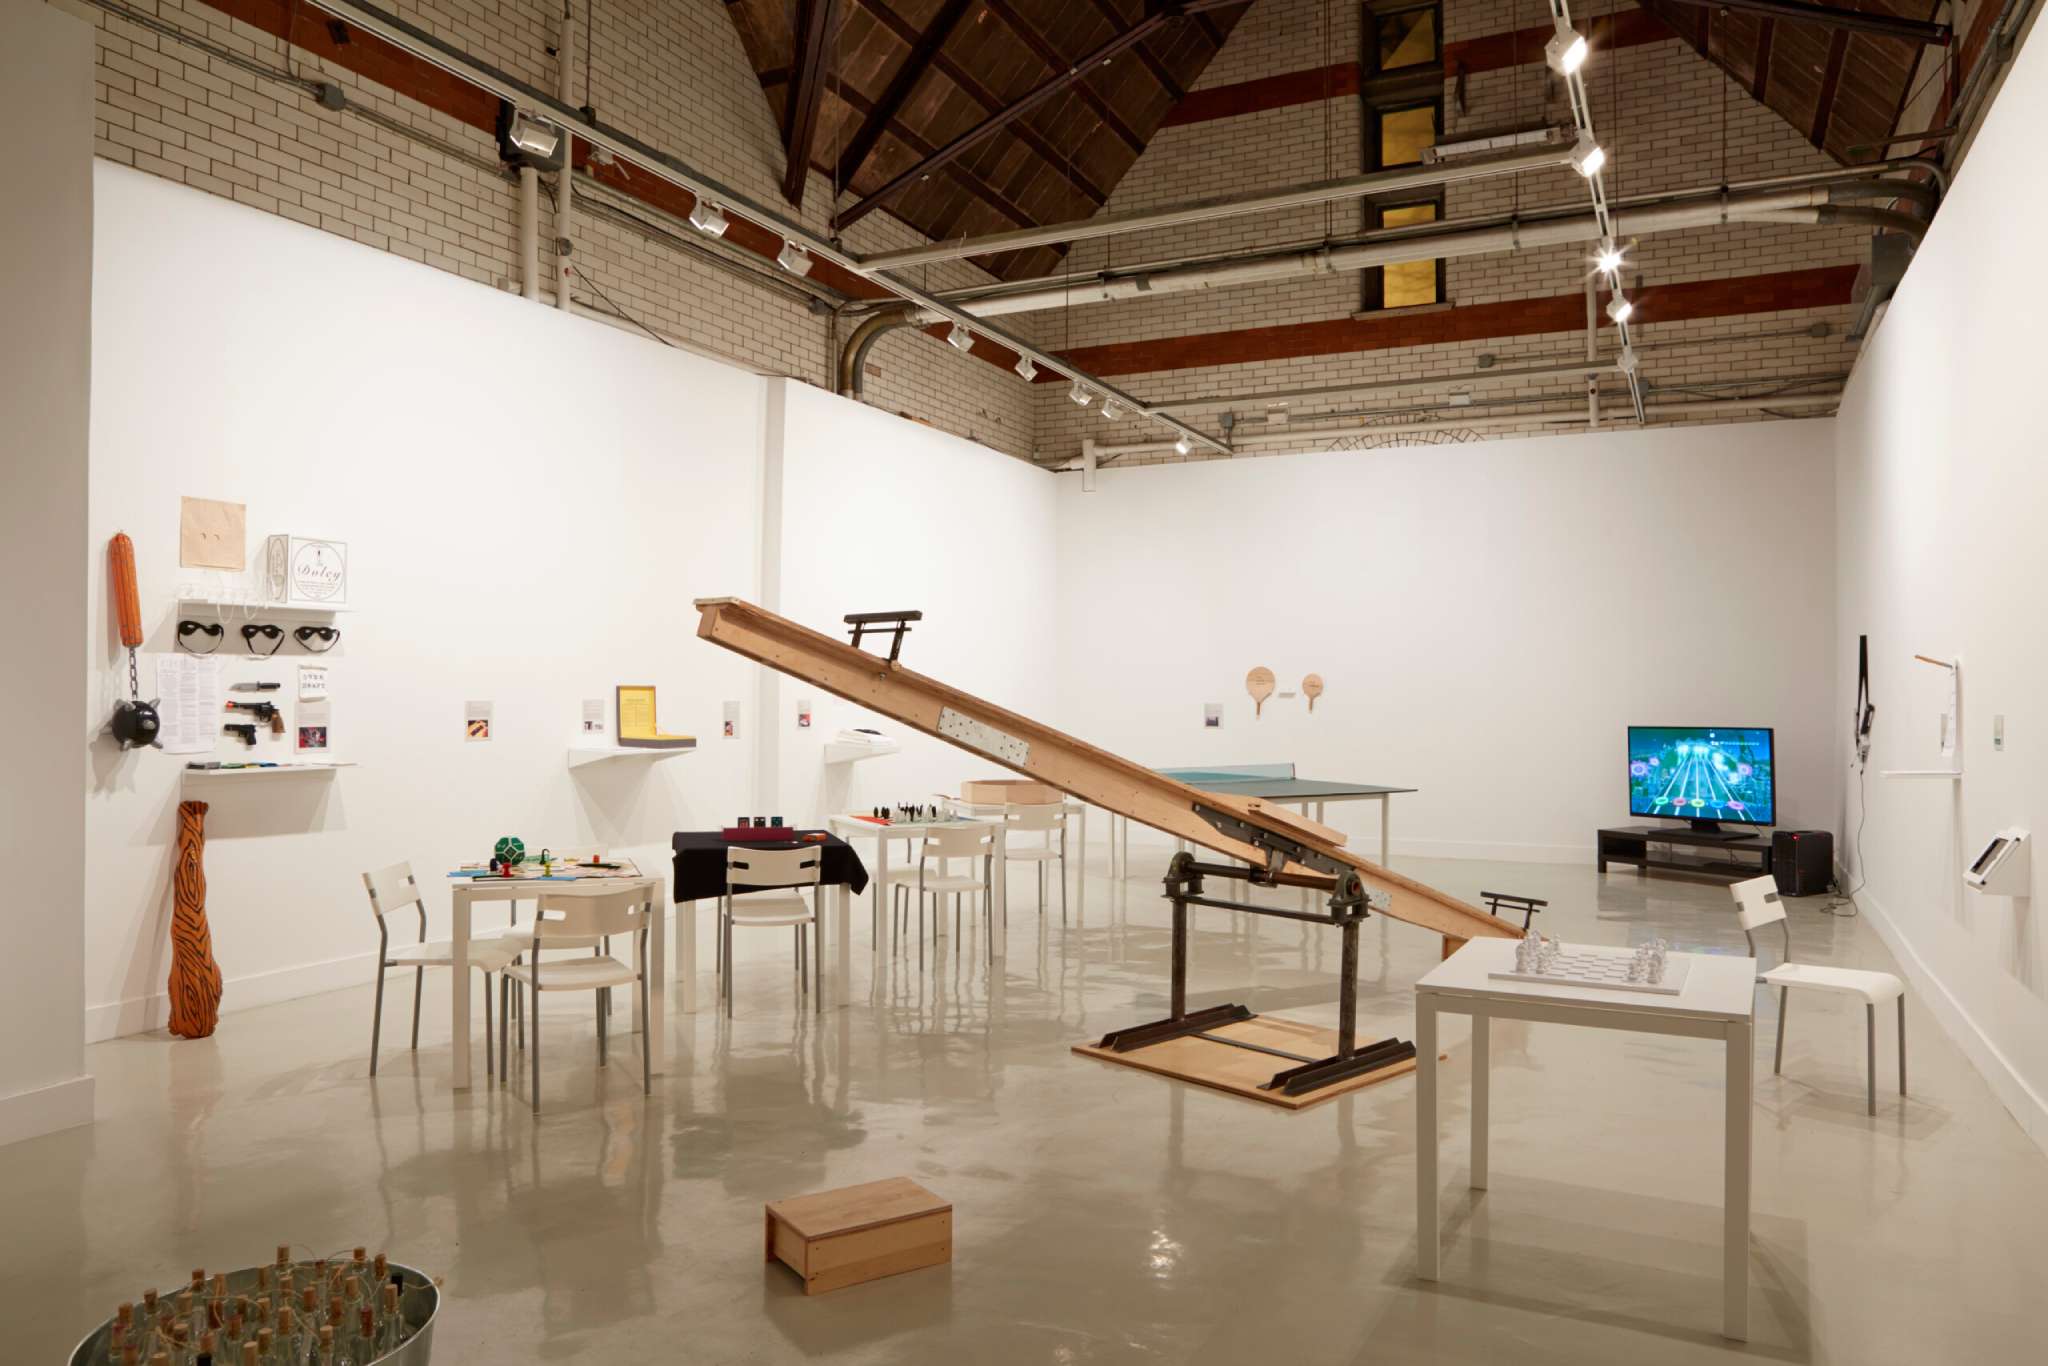 Installation view of "Free Play."